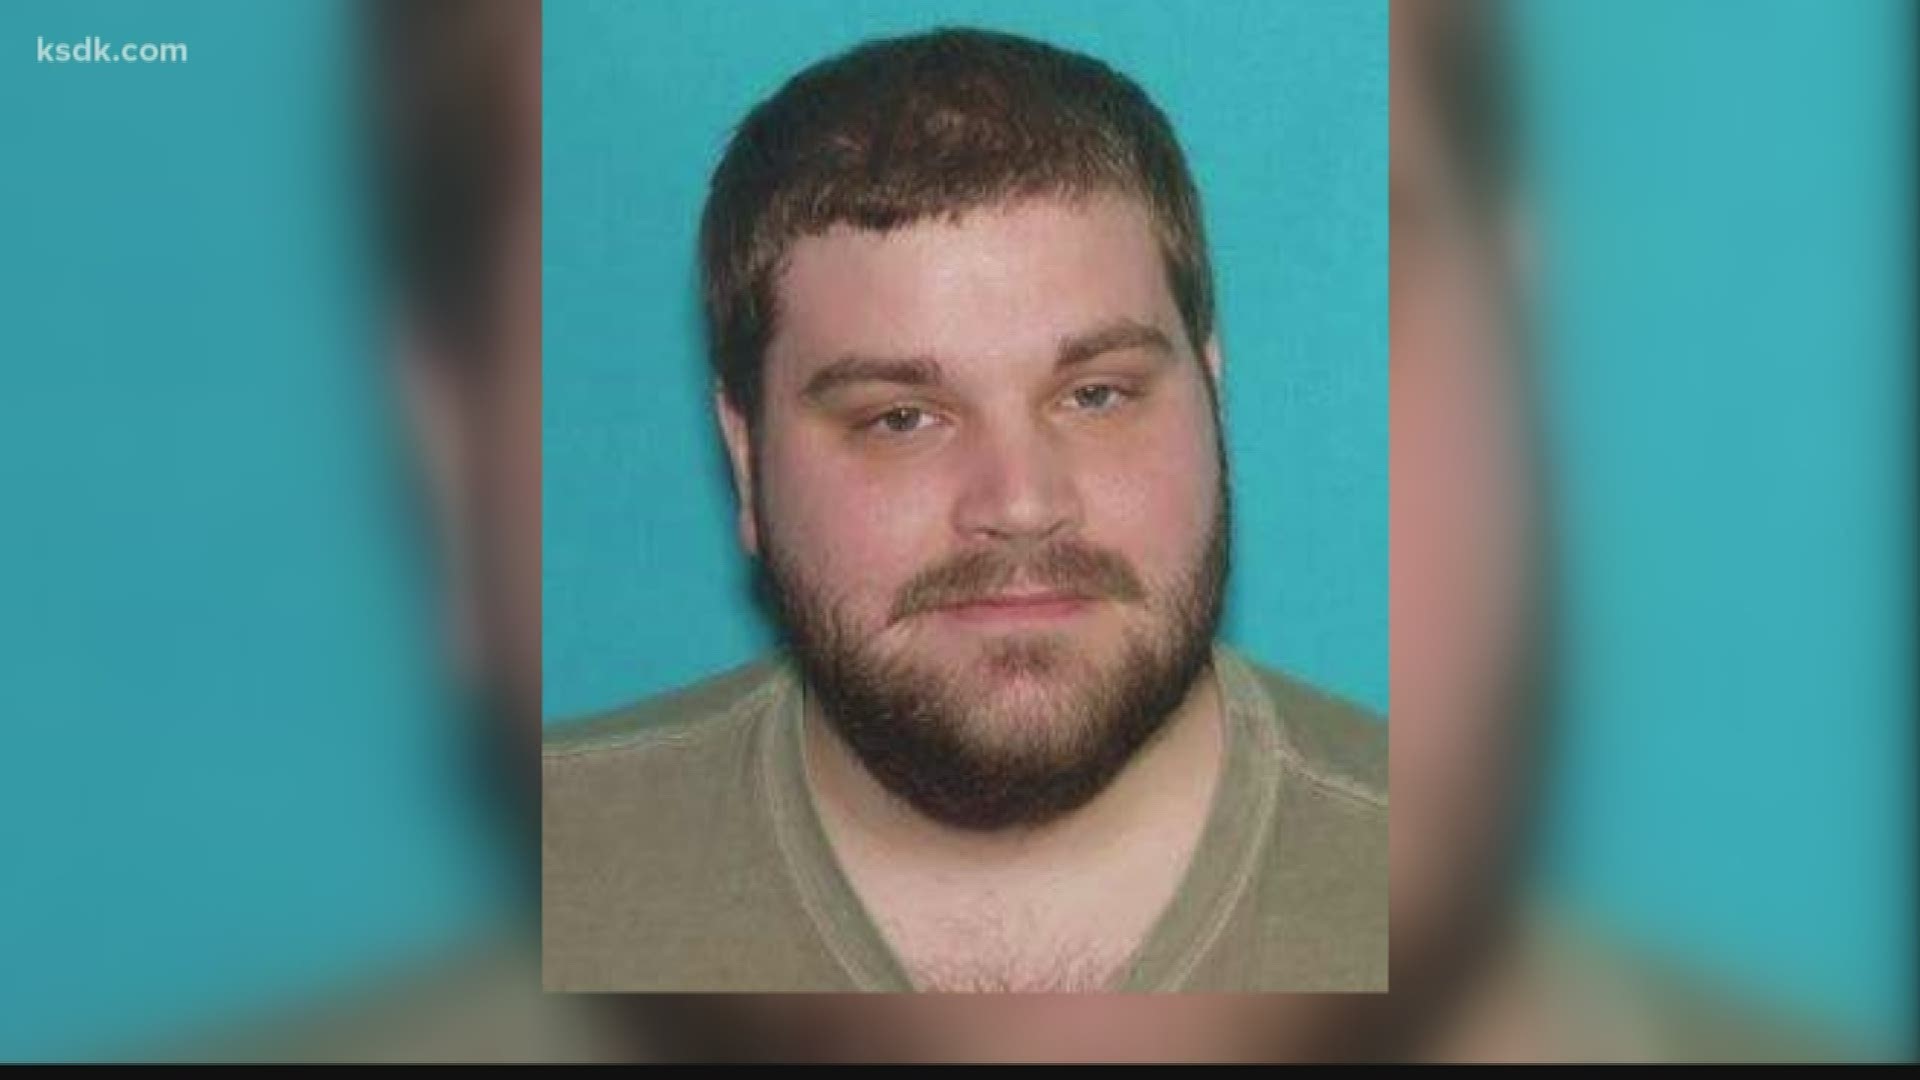 A city is in shock after a woman is shot and killed at the Maryland Heights Community Center. Michael Joseph Honkomp is charged with first degree murder and assault.